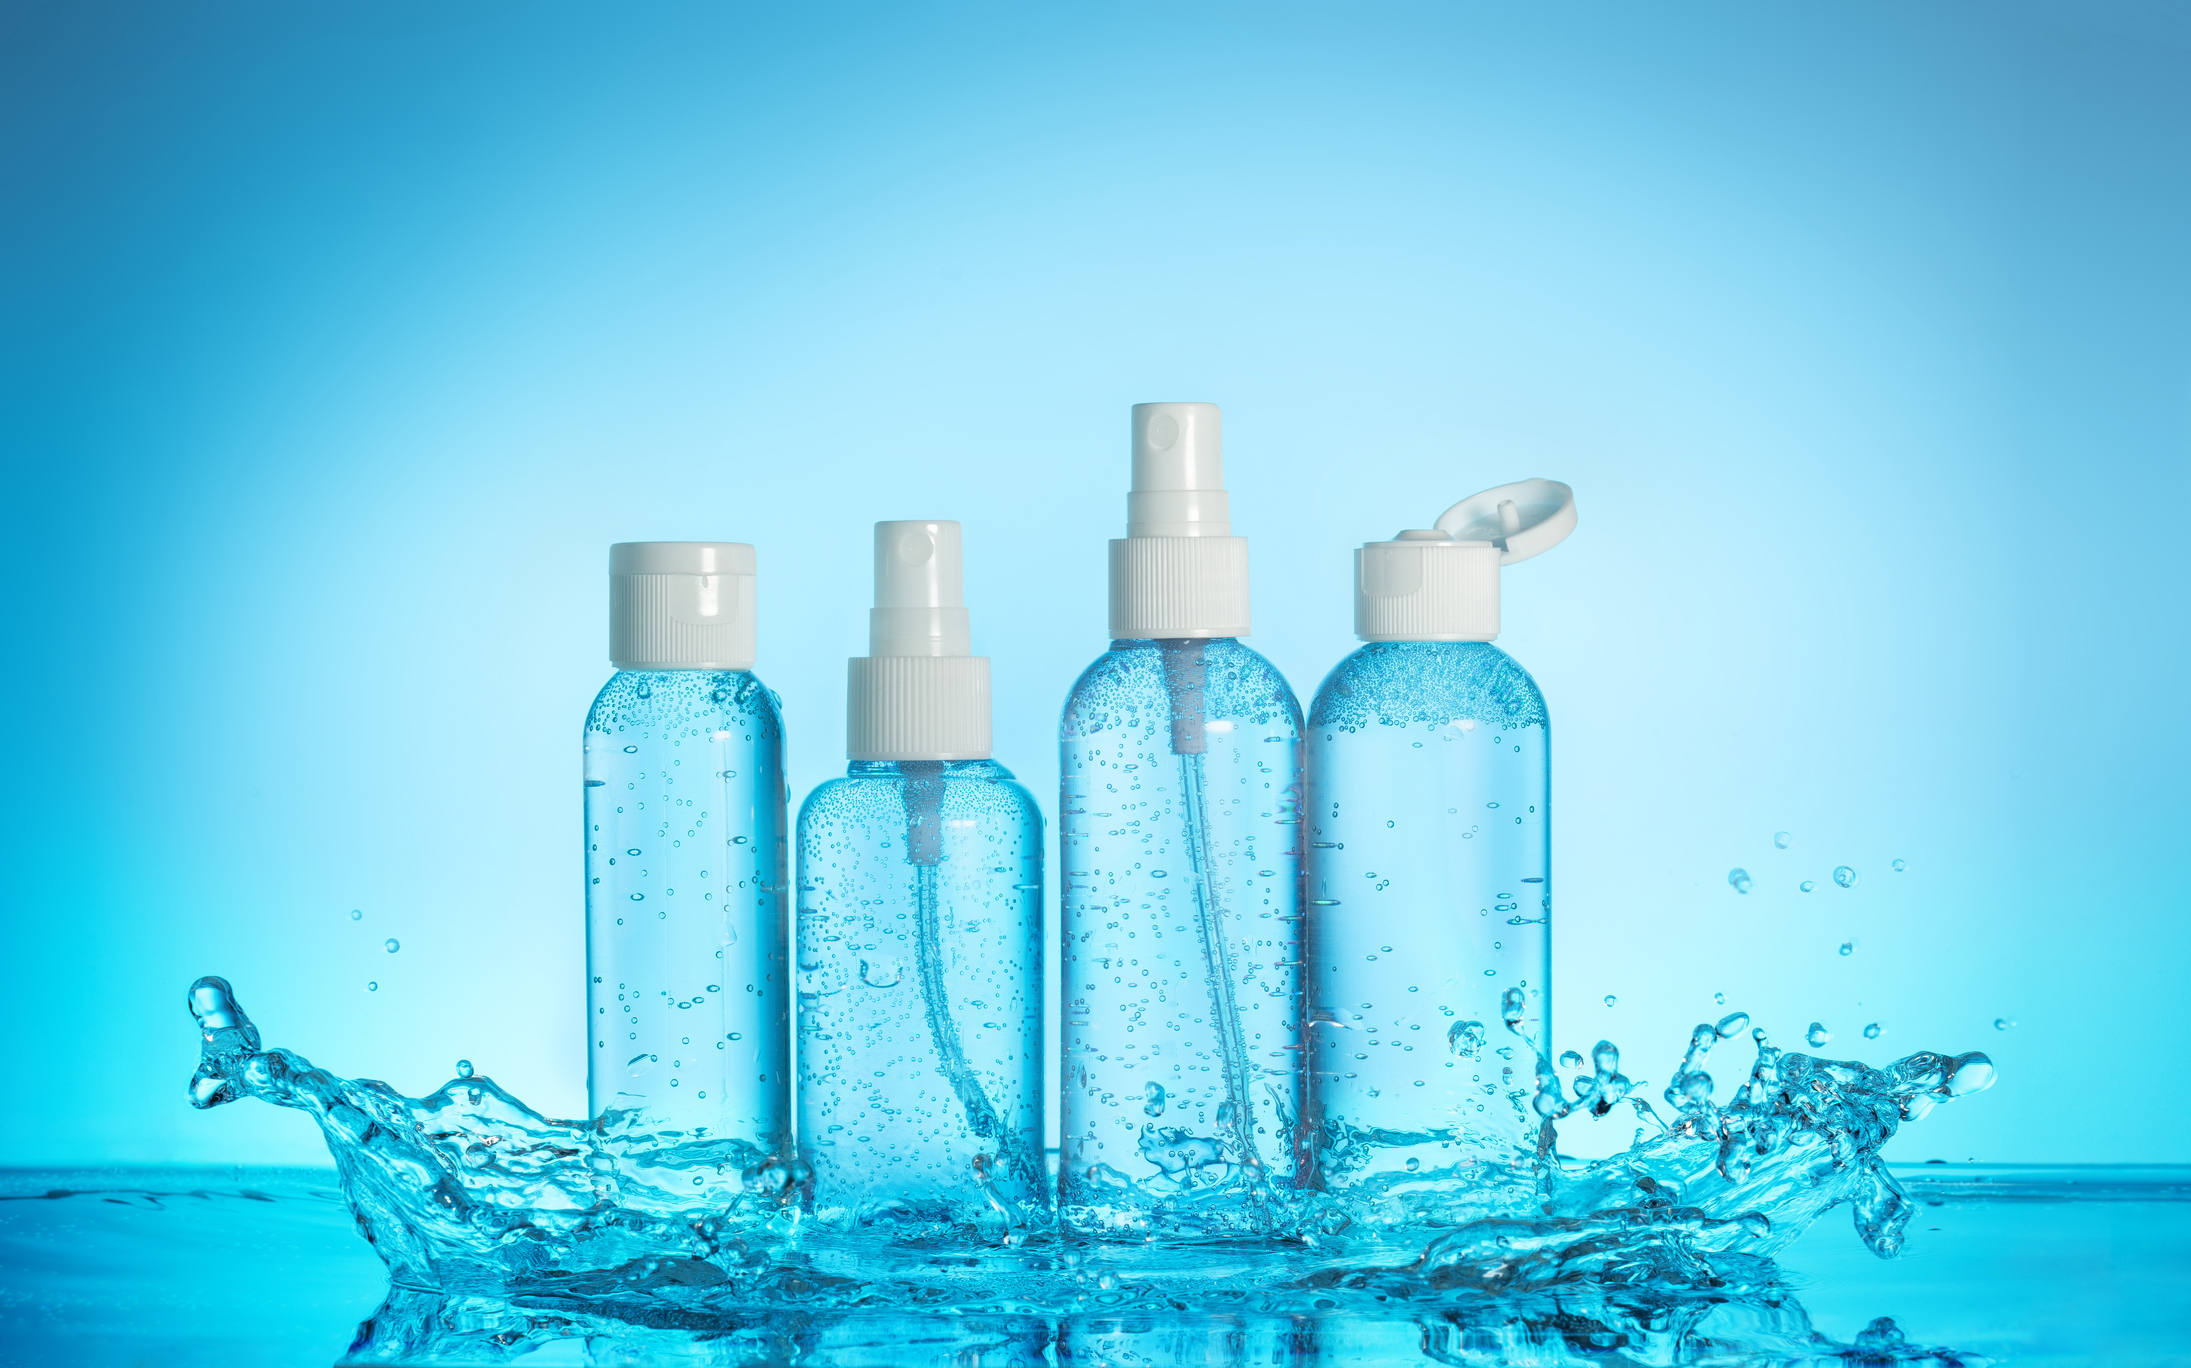 A set of four toiletry bottles sitting on a splash of blue water.